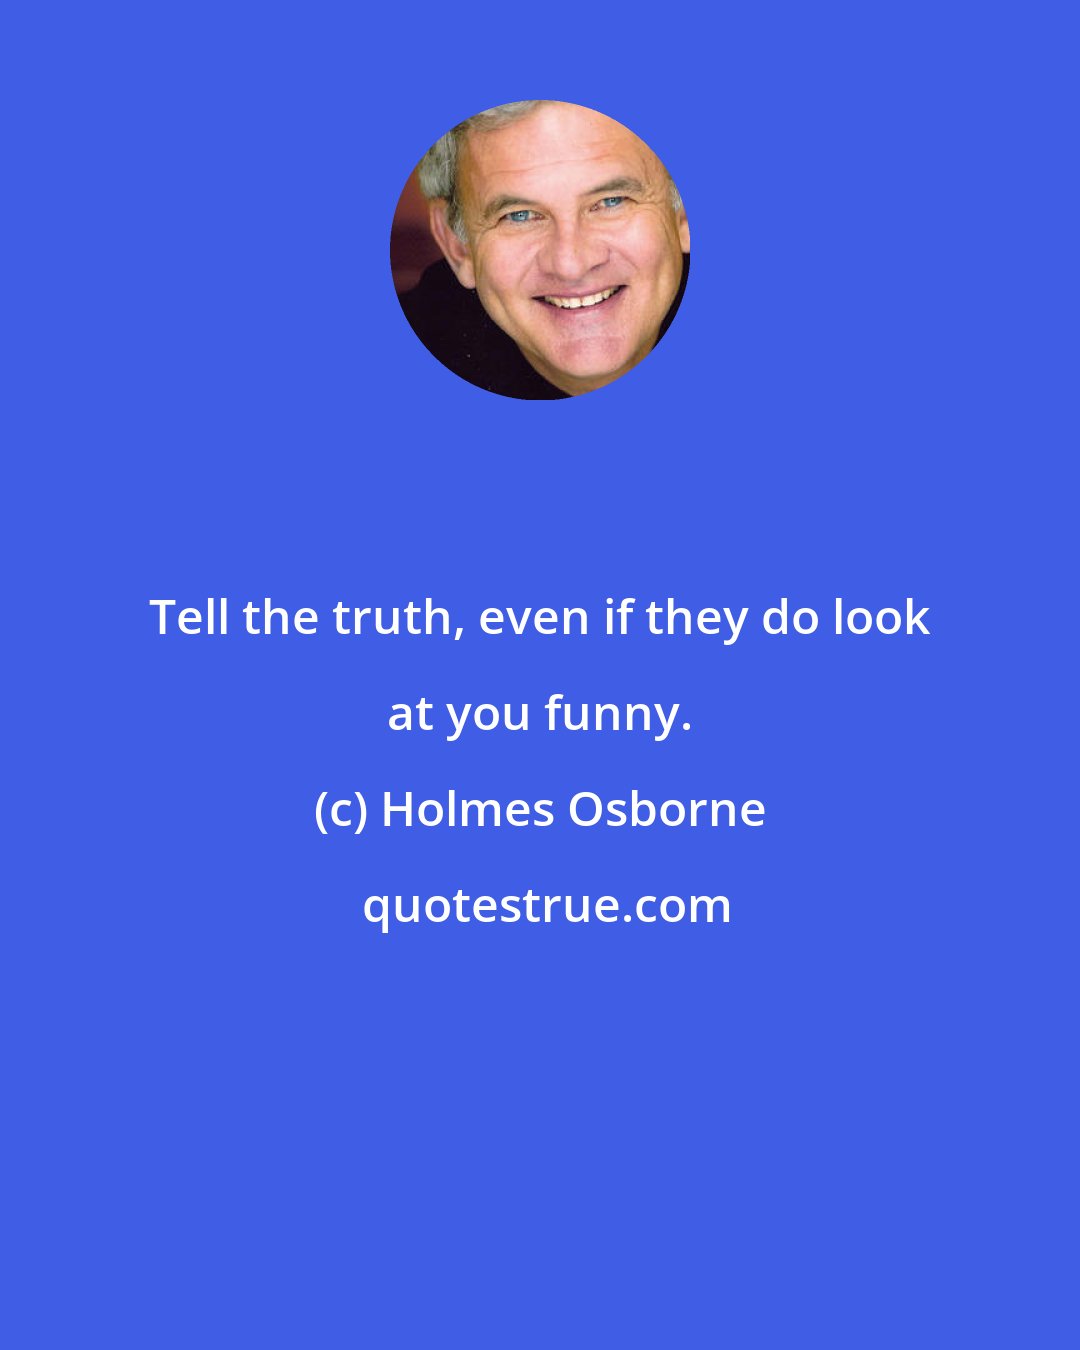 Holmes Osborne: Tell the truth, even if they do look at you funny.